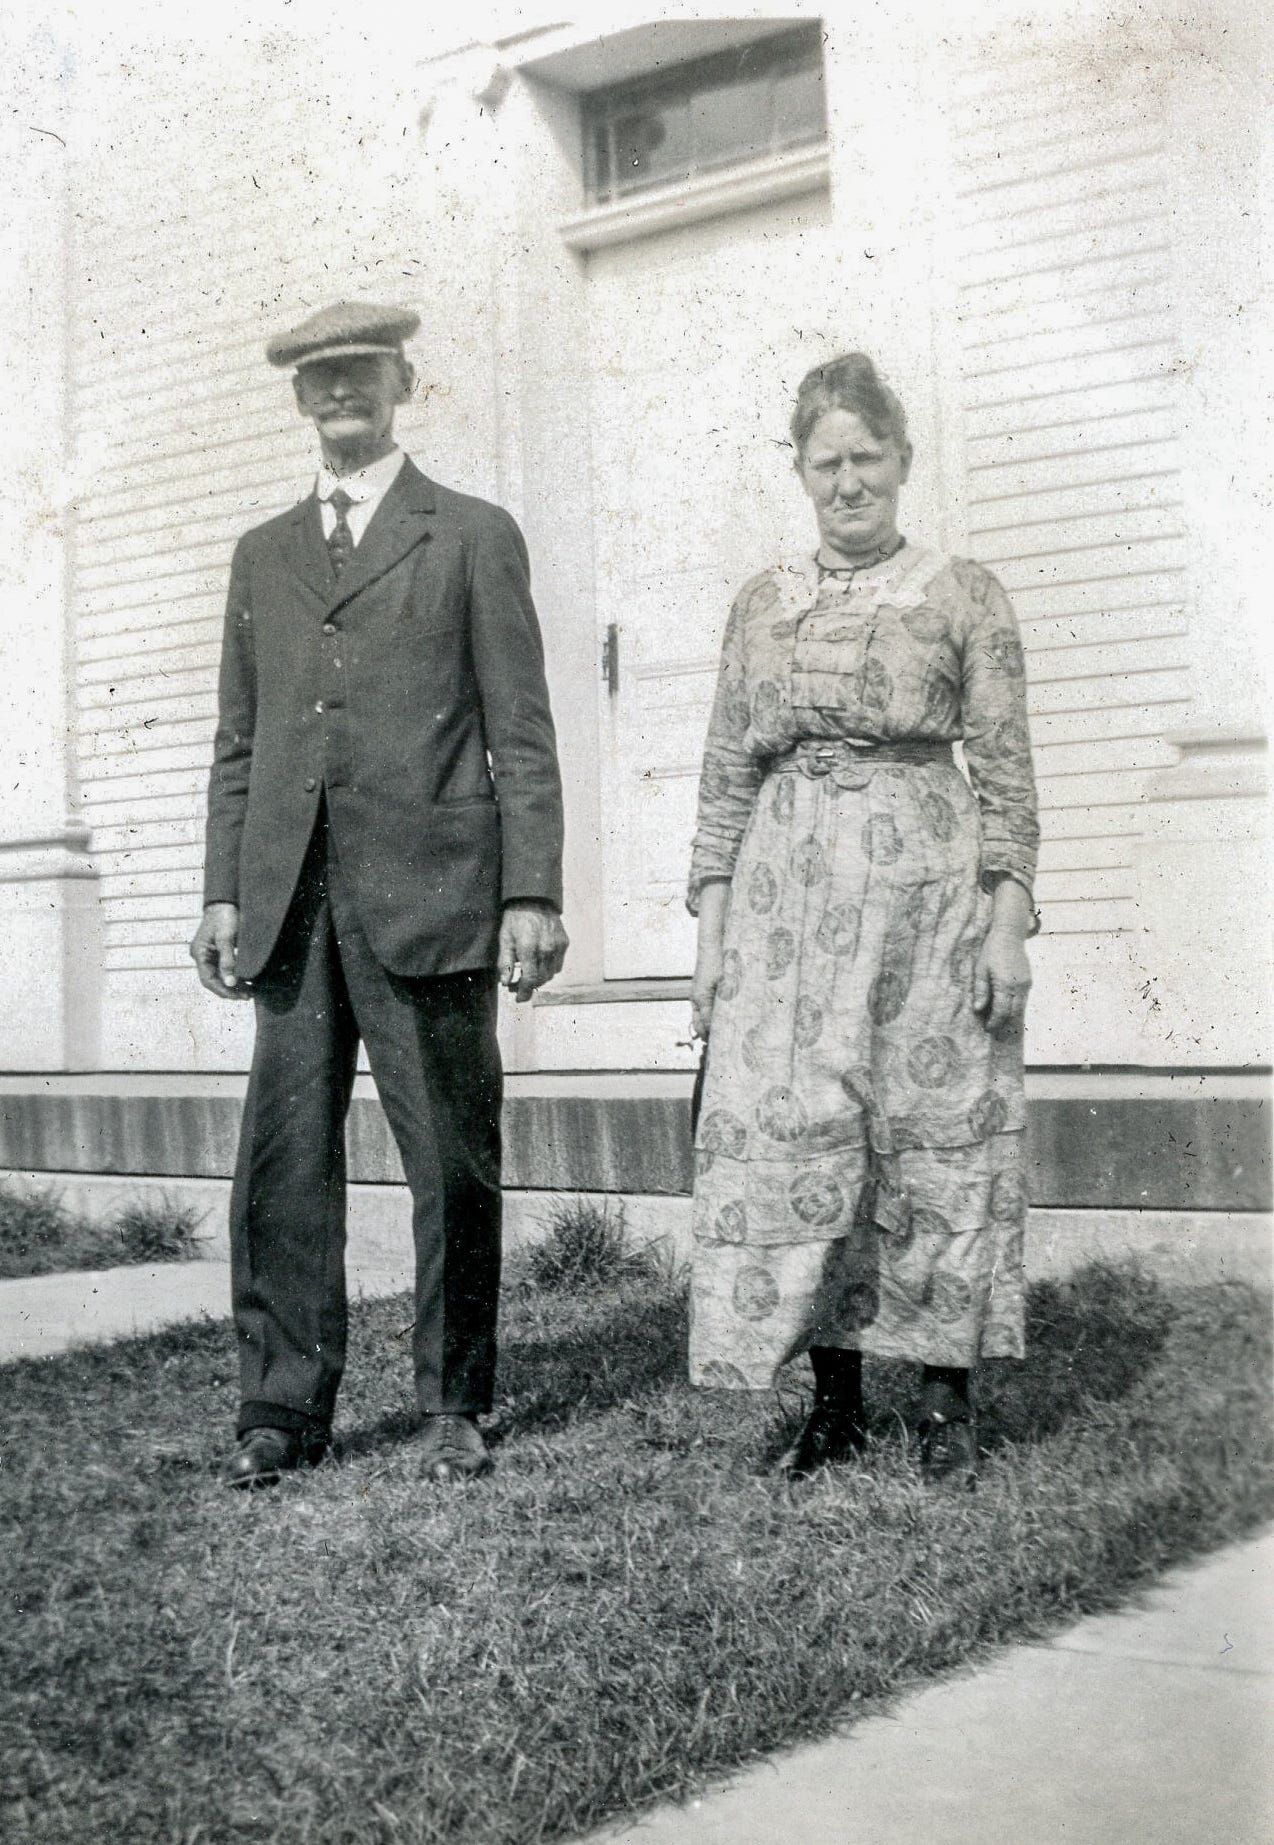 Mr. and Mrs. George Jaquith